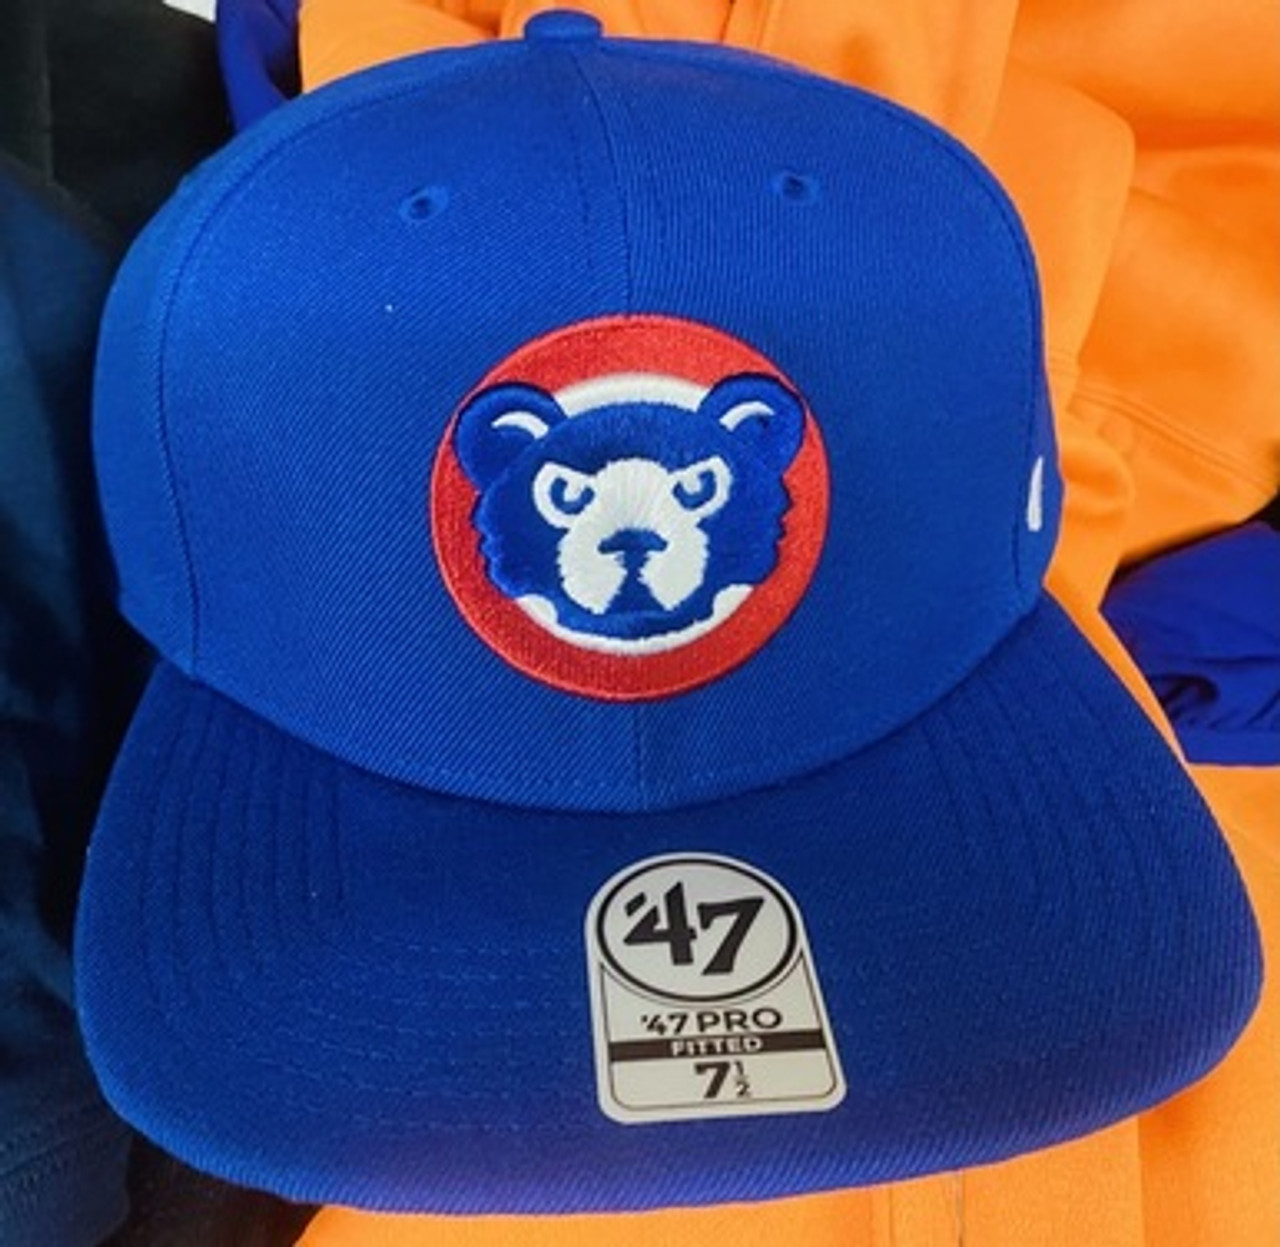 MLB Chicago Cubs Cap by 47 Brand